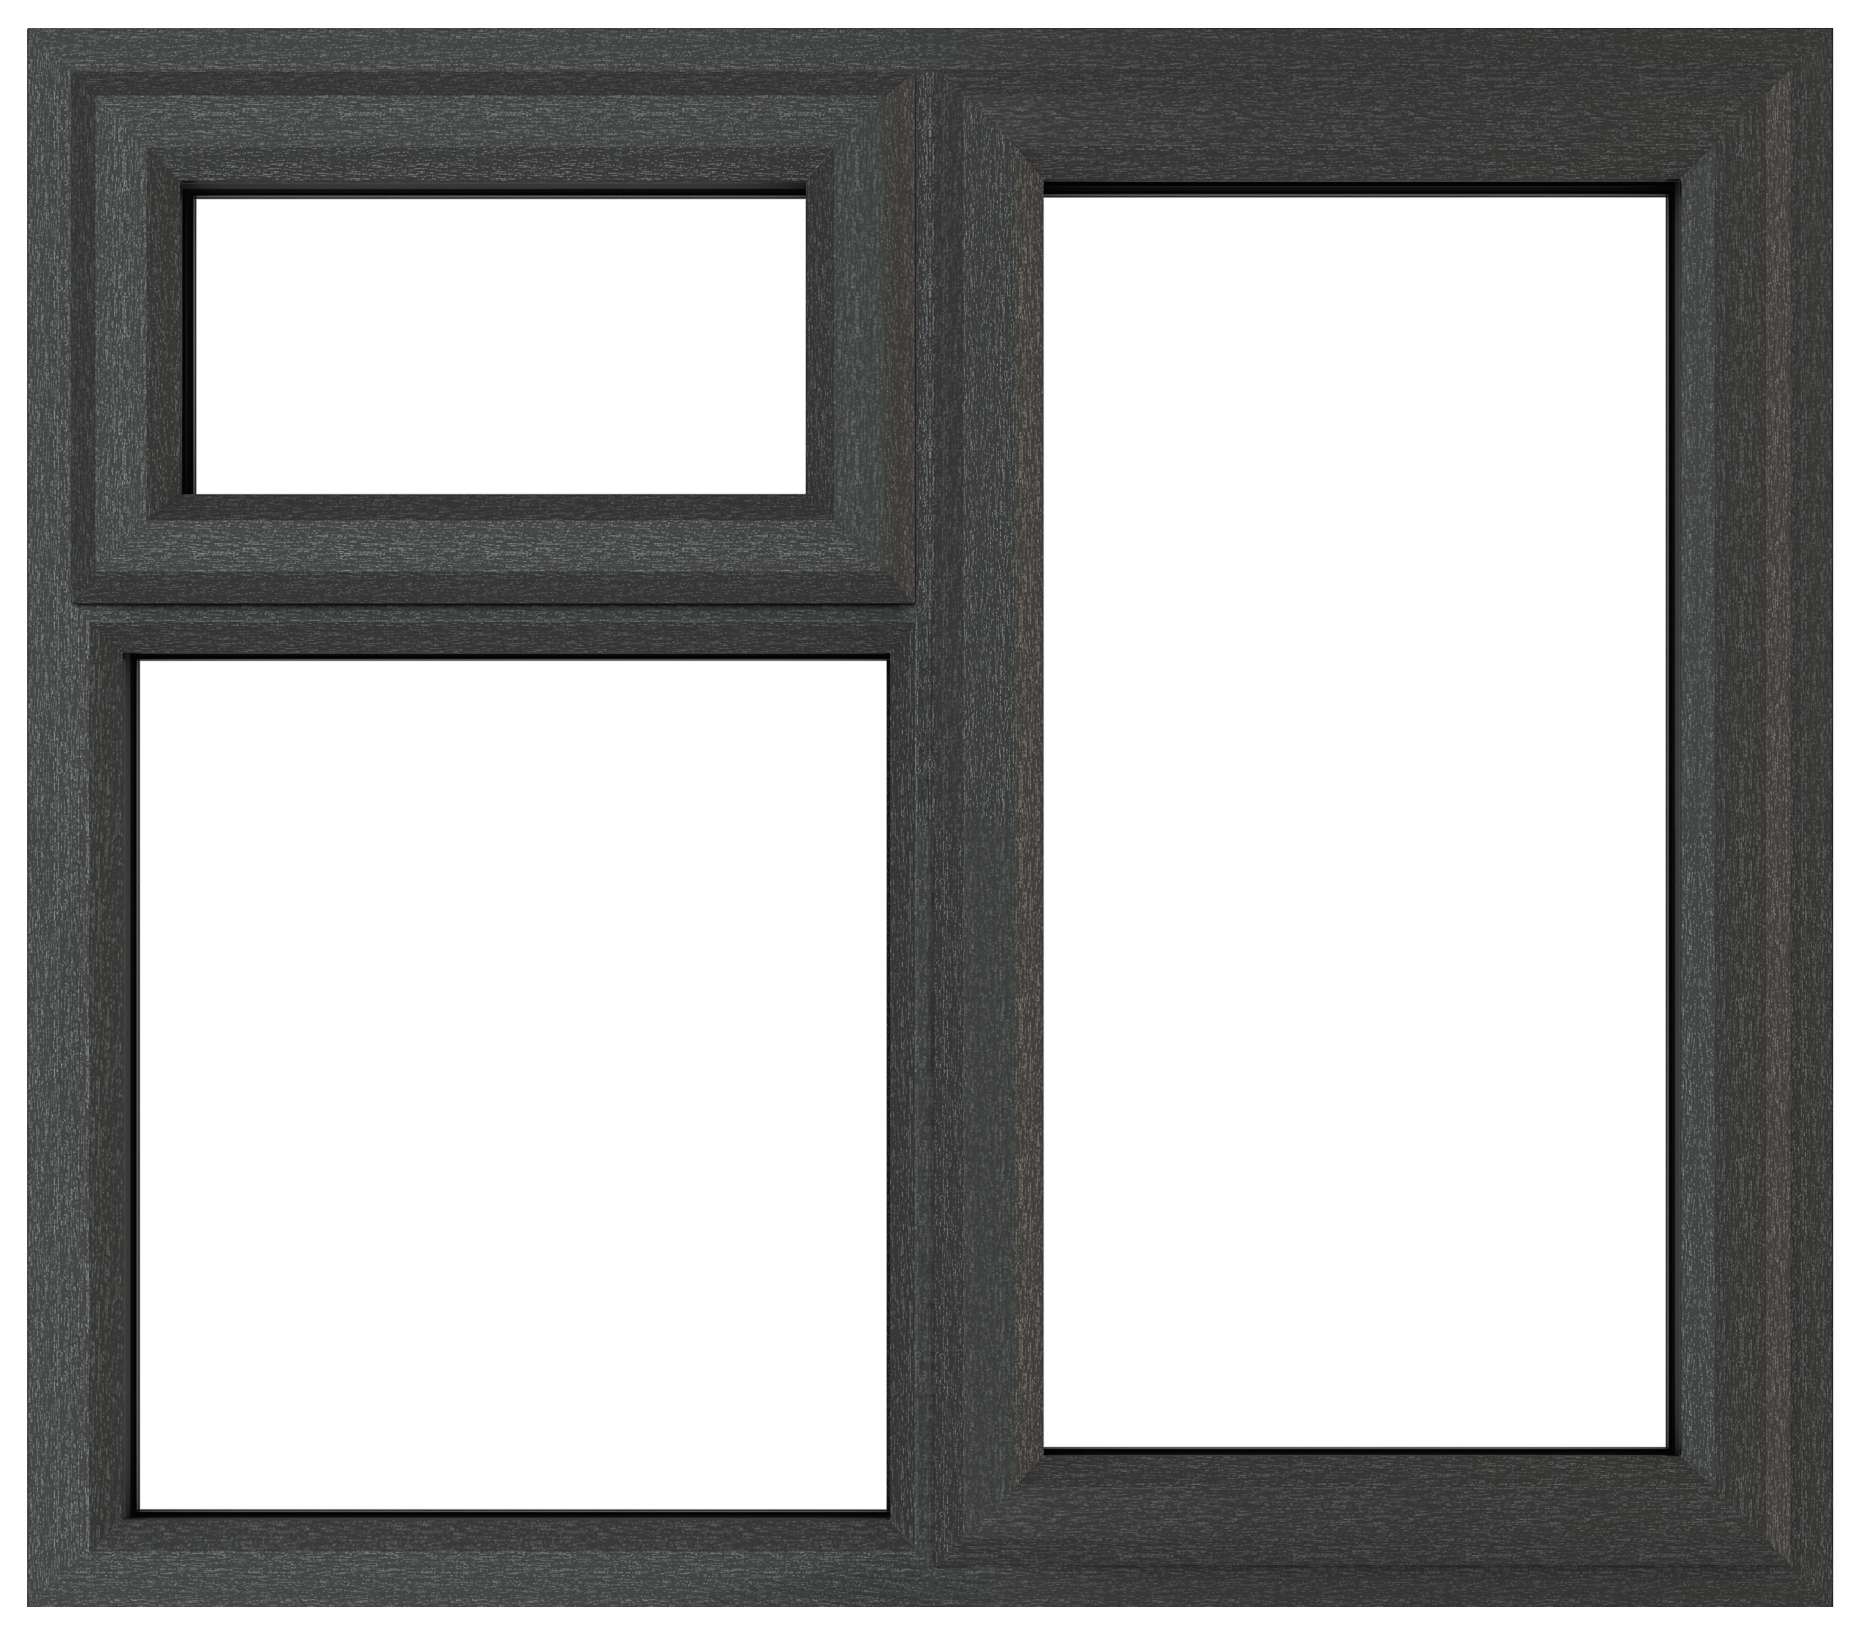 Crystal uPVC Grey / White Right Hung Top Opener Clear Triple Glazed Window - 1190 x 1115mm